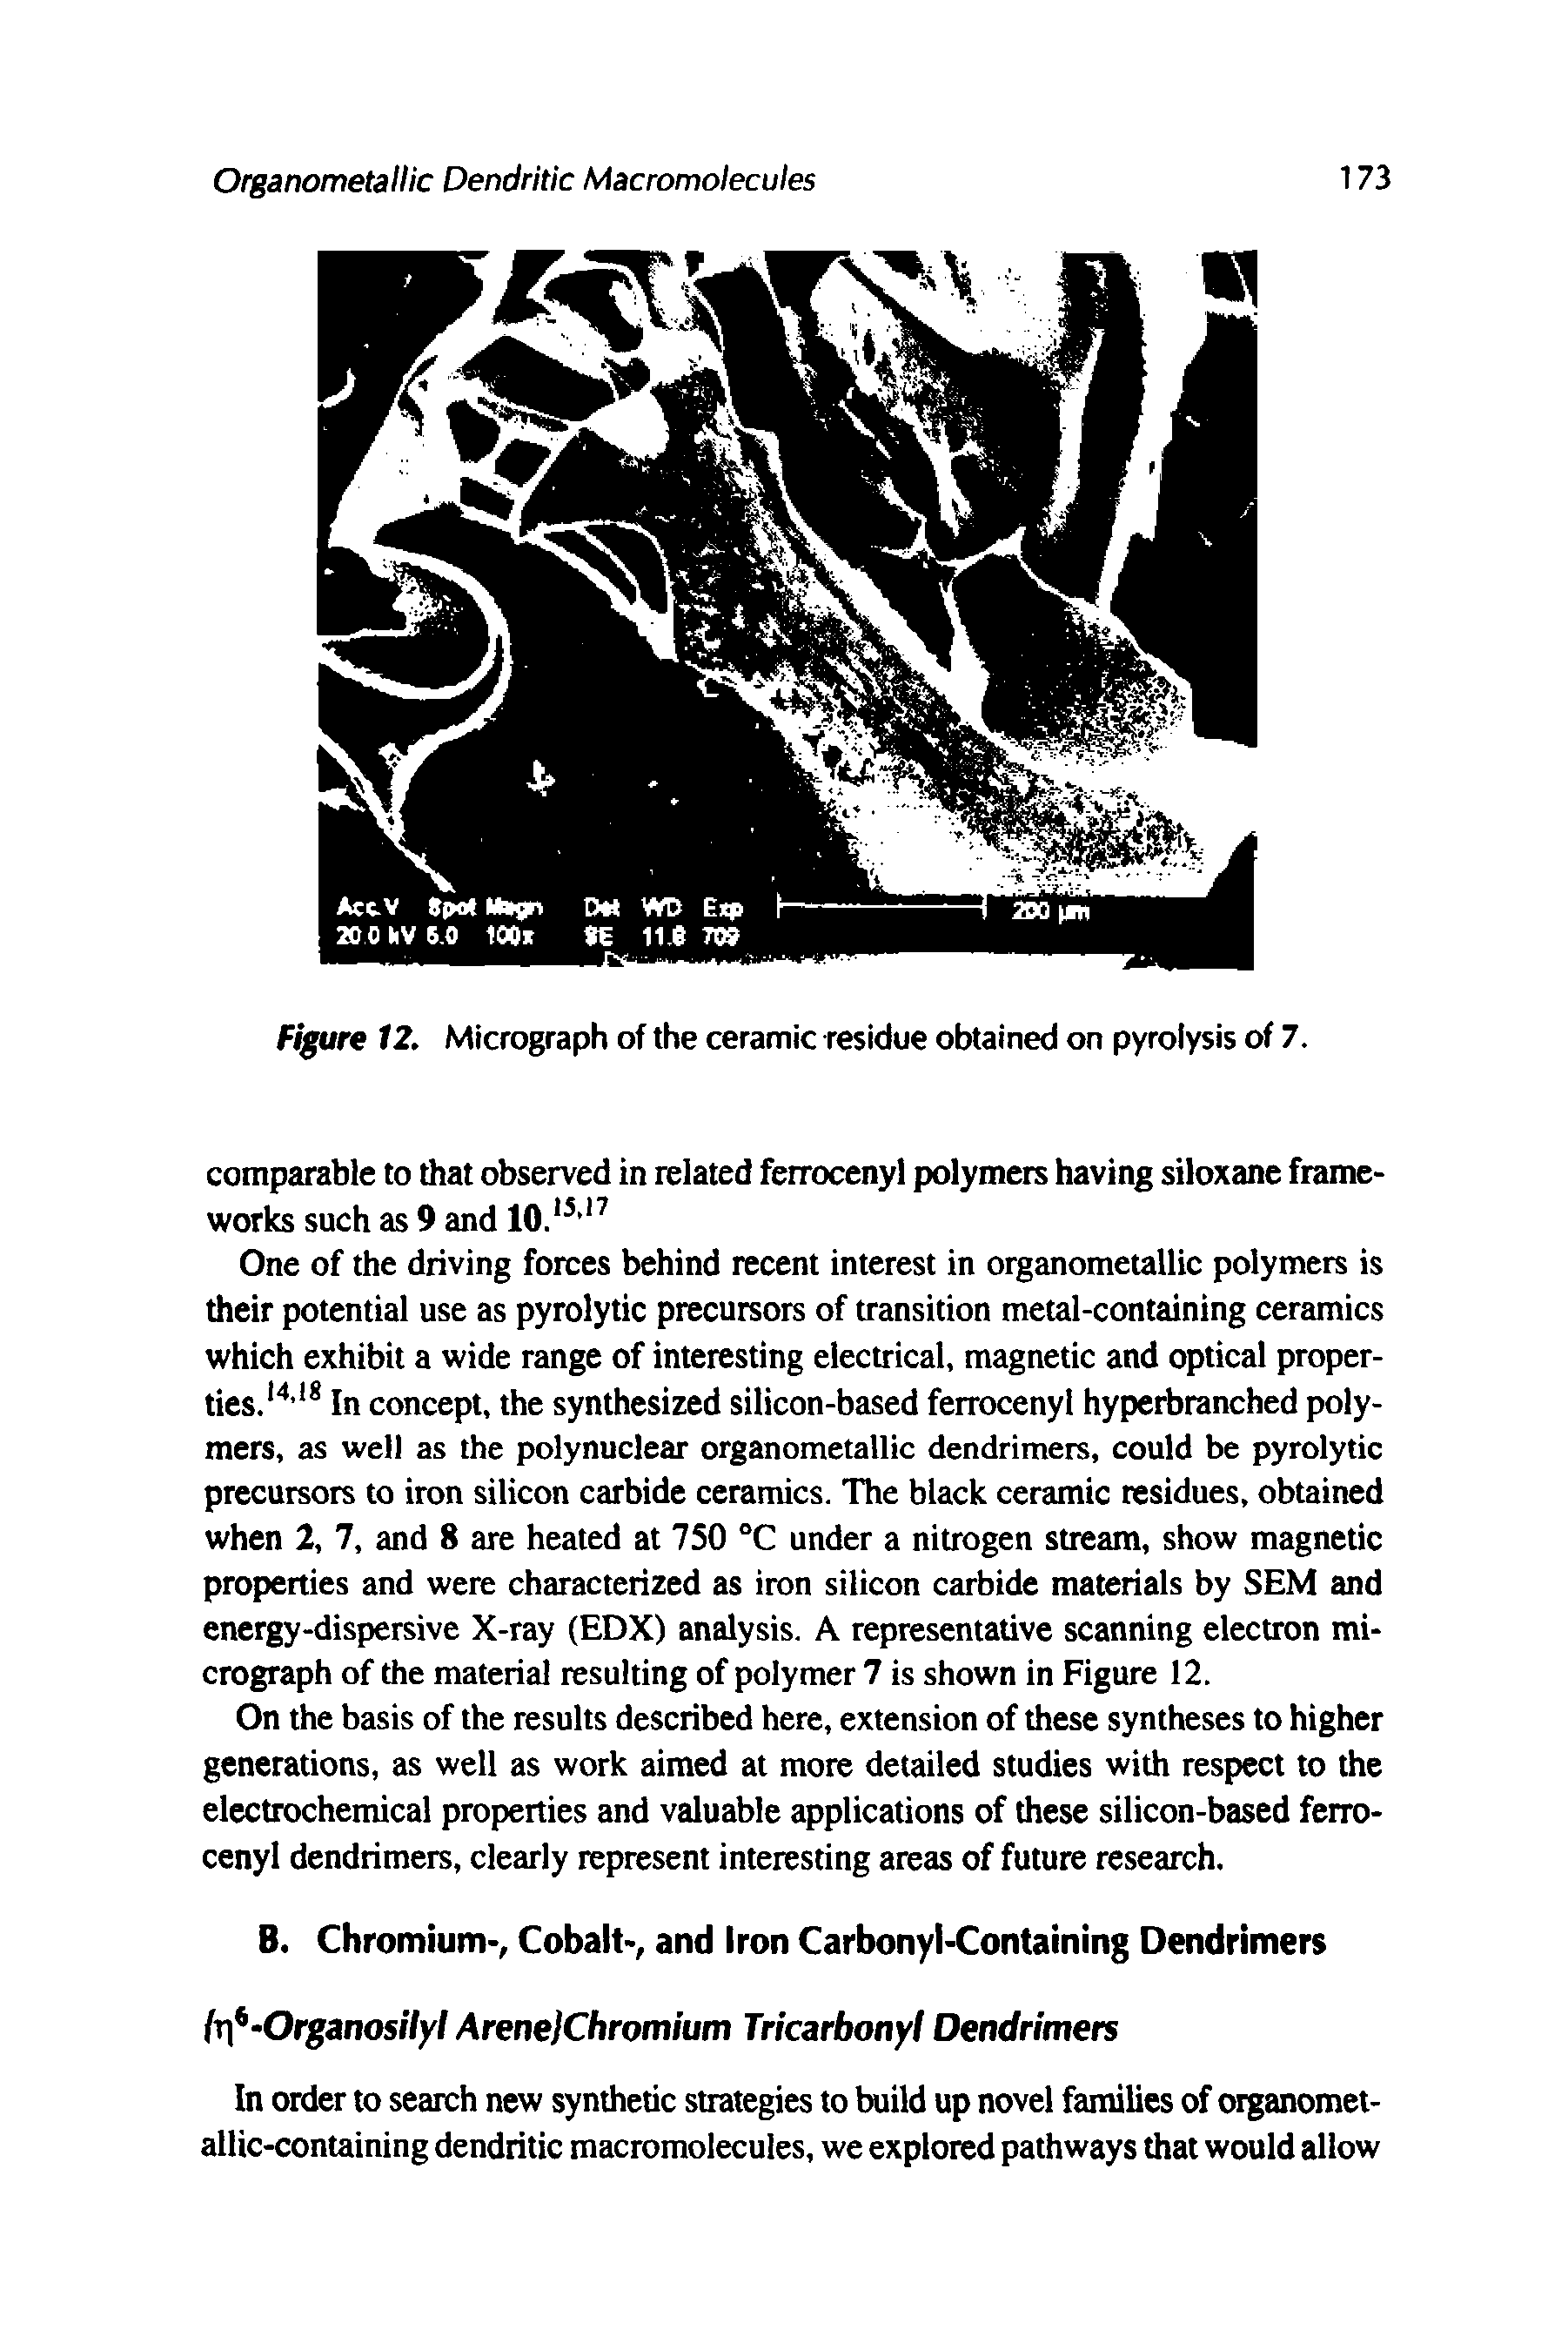 Figure 12. Micrograph of the ceramic residue obtained on pyrolysis of 7.